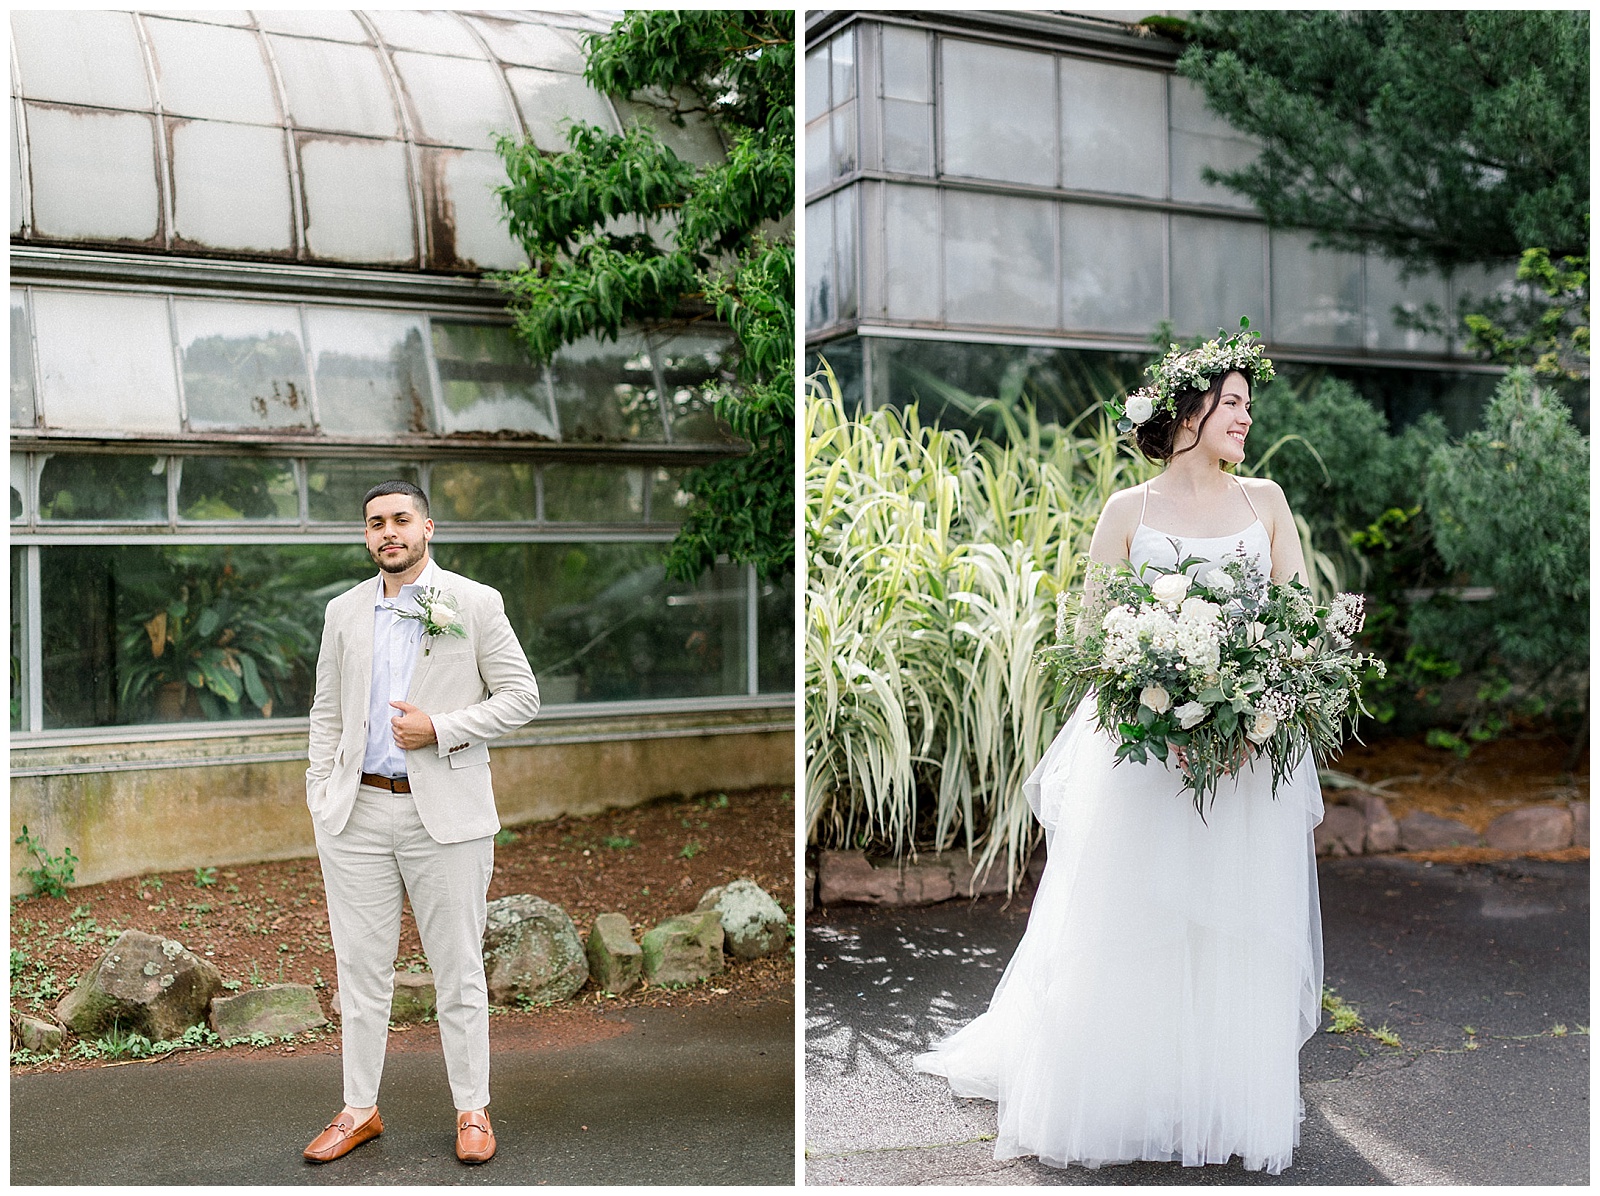 portrait of couple at otts exotic plants greenhouse in pa on their wedding day in boho wedding attire and floral crown, right before their intimate home DIY wedding ceremony